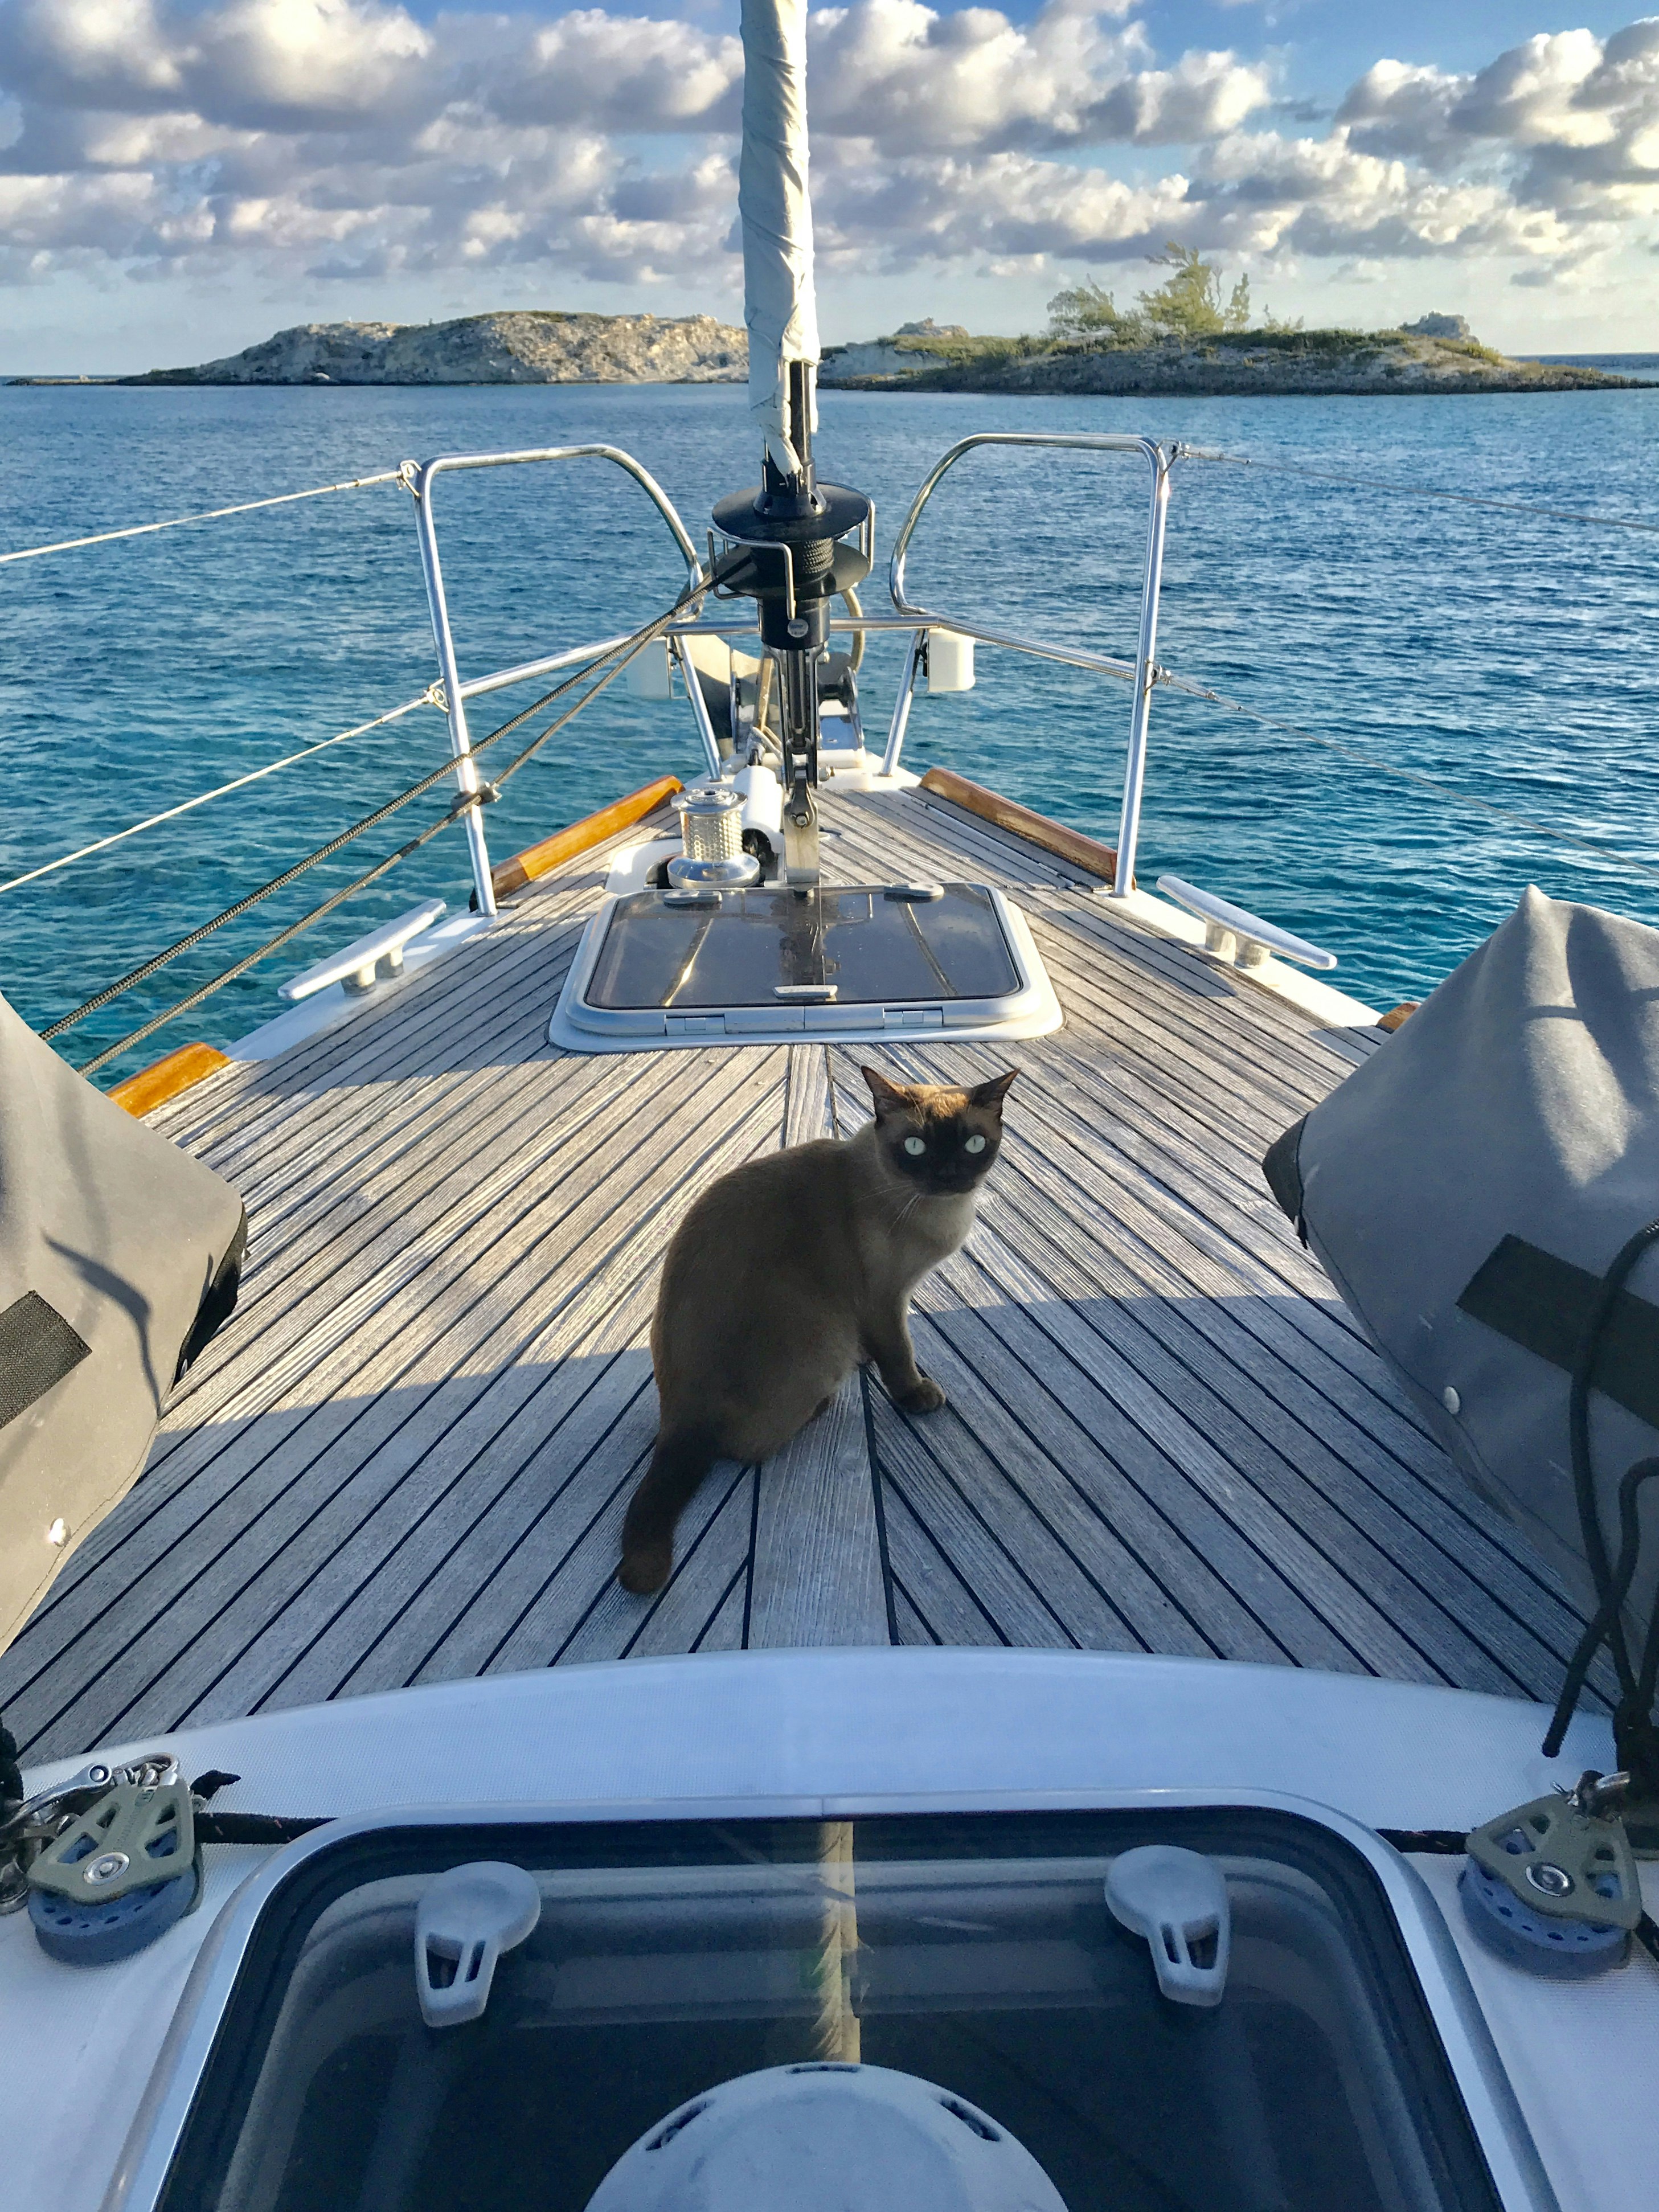 Miss Rigby the Boat Kitty